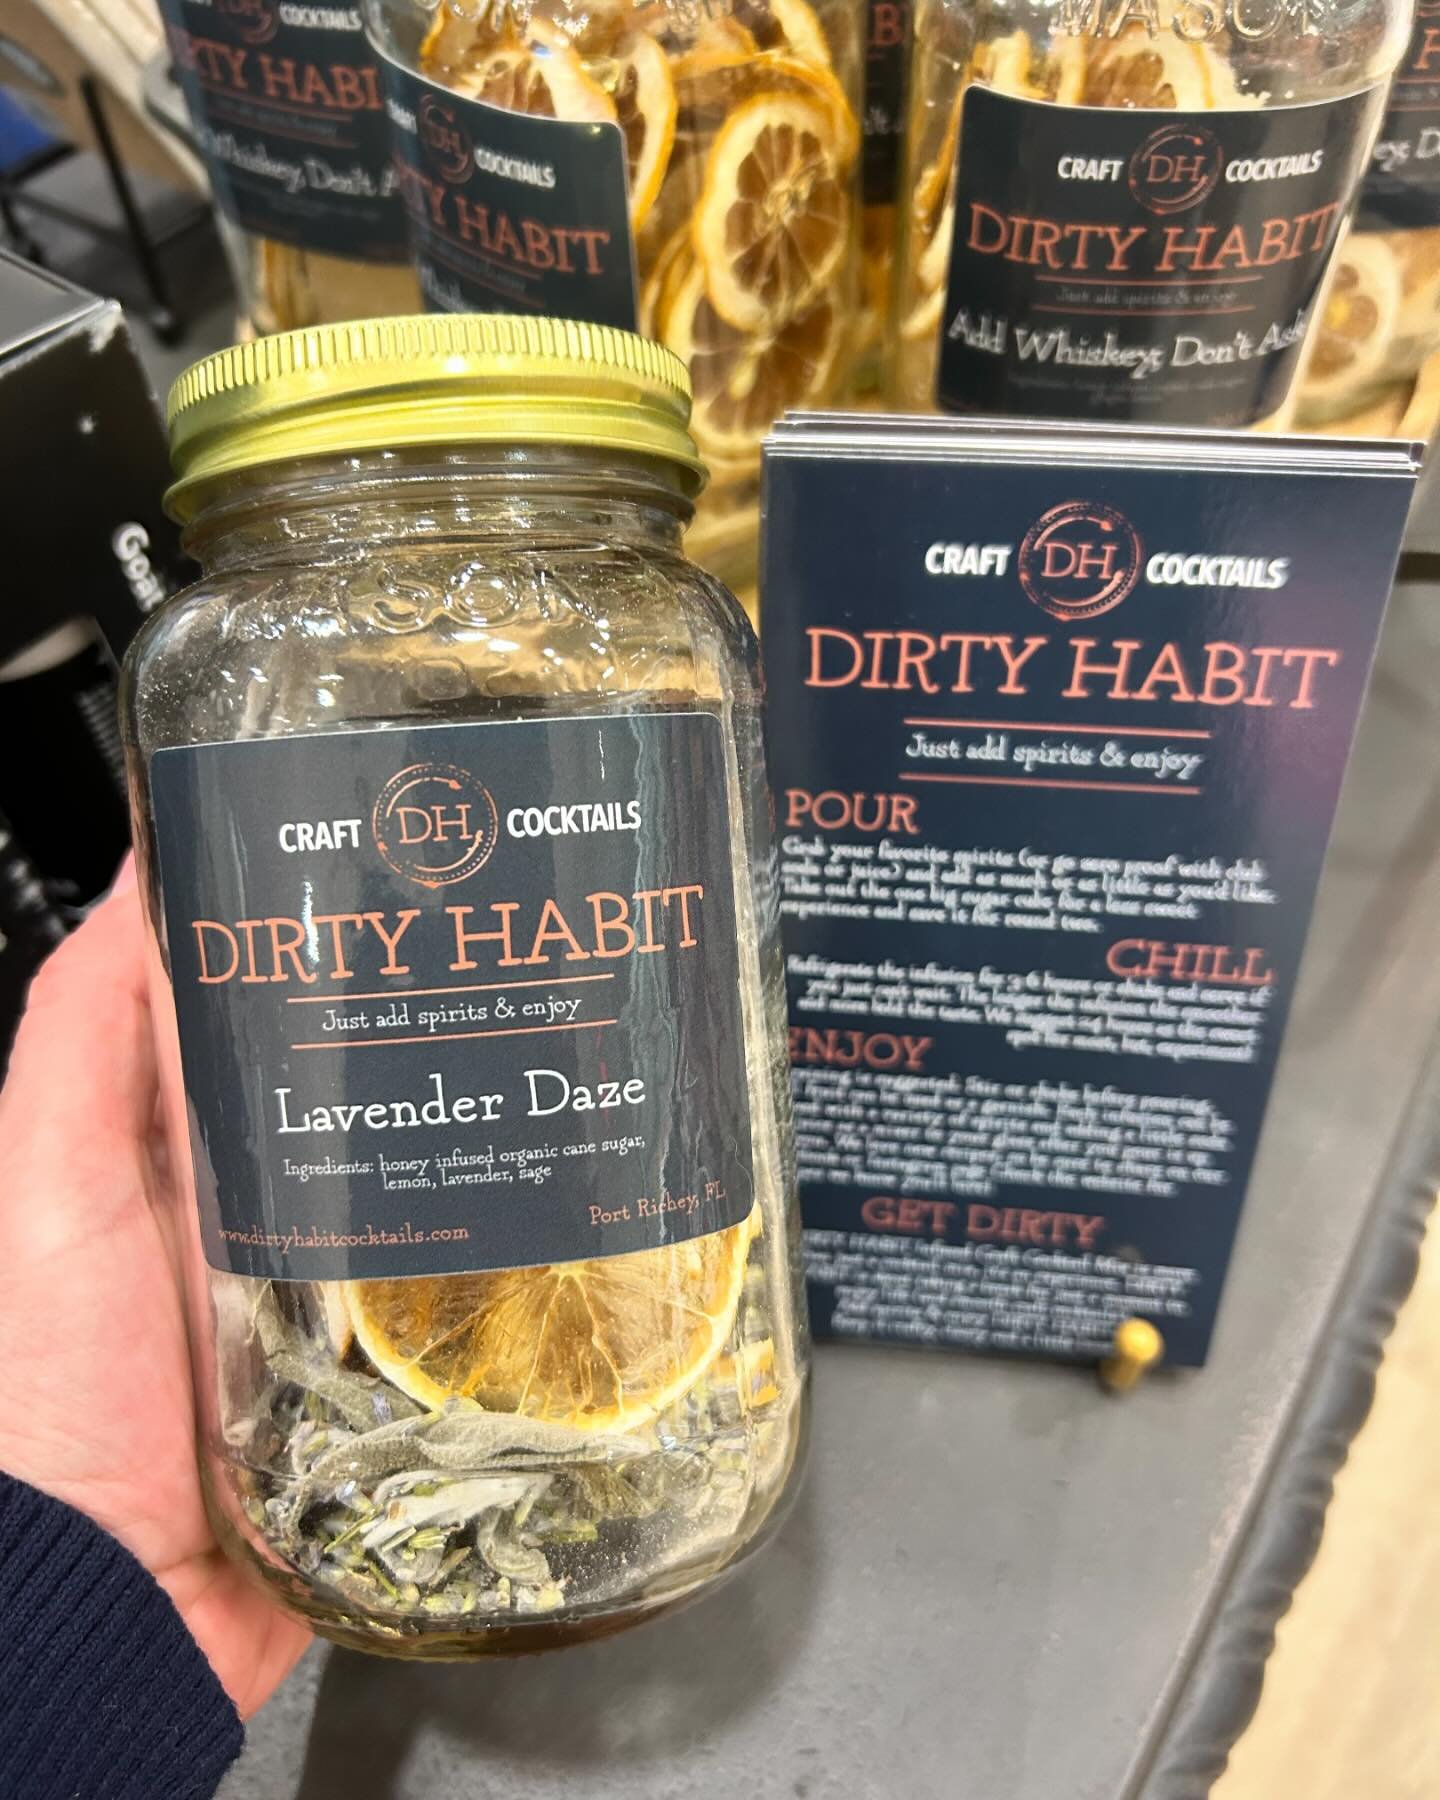 New flavor: lavender daze in the shop!  Y&rsquo;all love these @dirtyhabit_cocktailmix - just add spirits and enjoy. So easy and fun for busy summer months. Perfect gifts. Open til 6 @thecrossingclarendon. 

#shoplocal #shopsmall #shoparl #boutiquesh